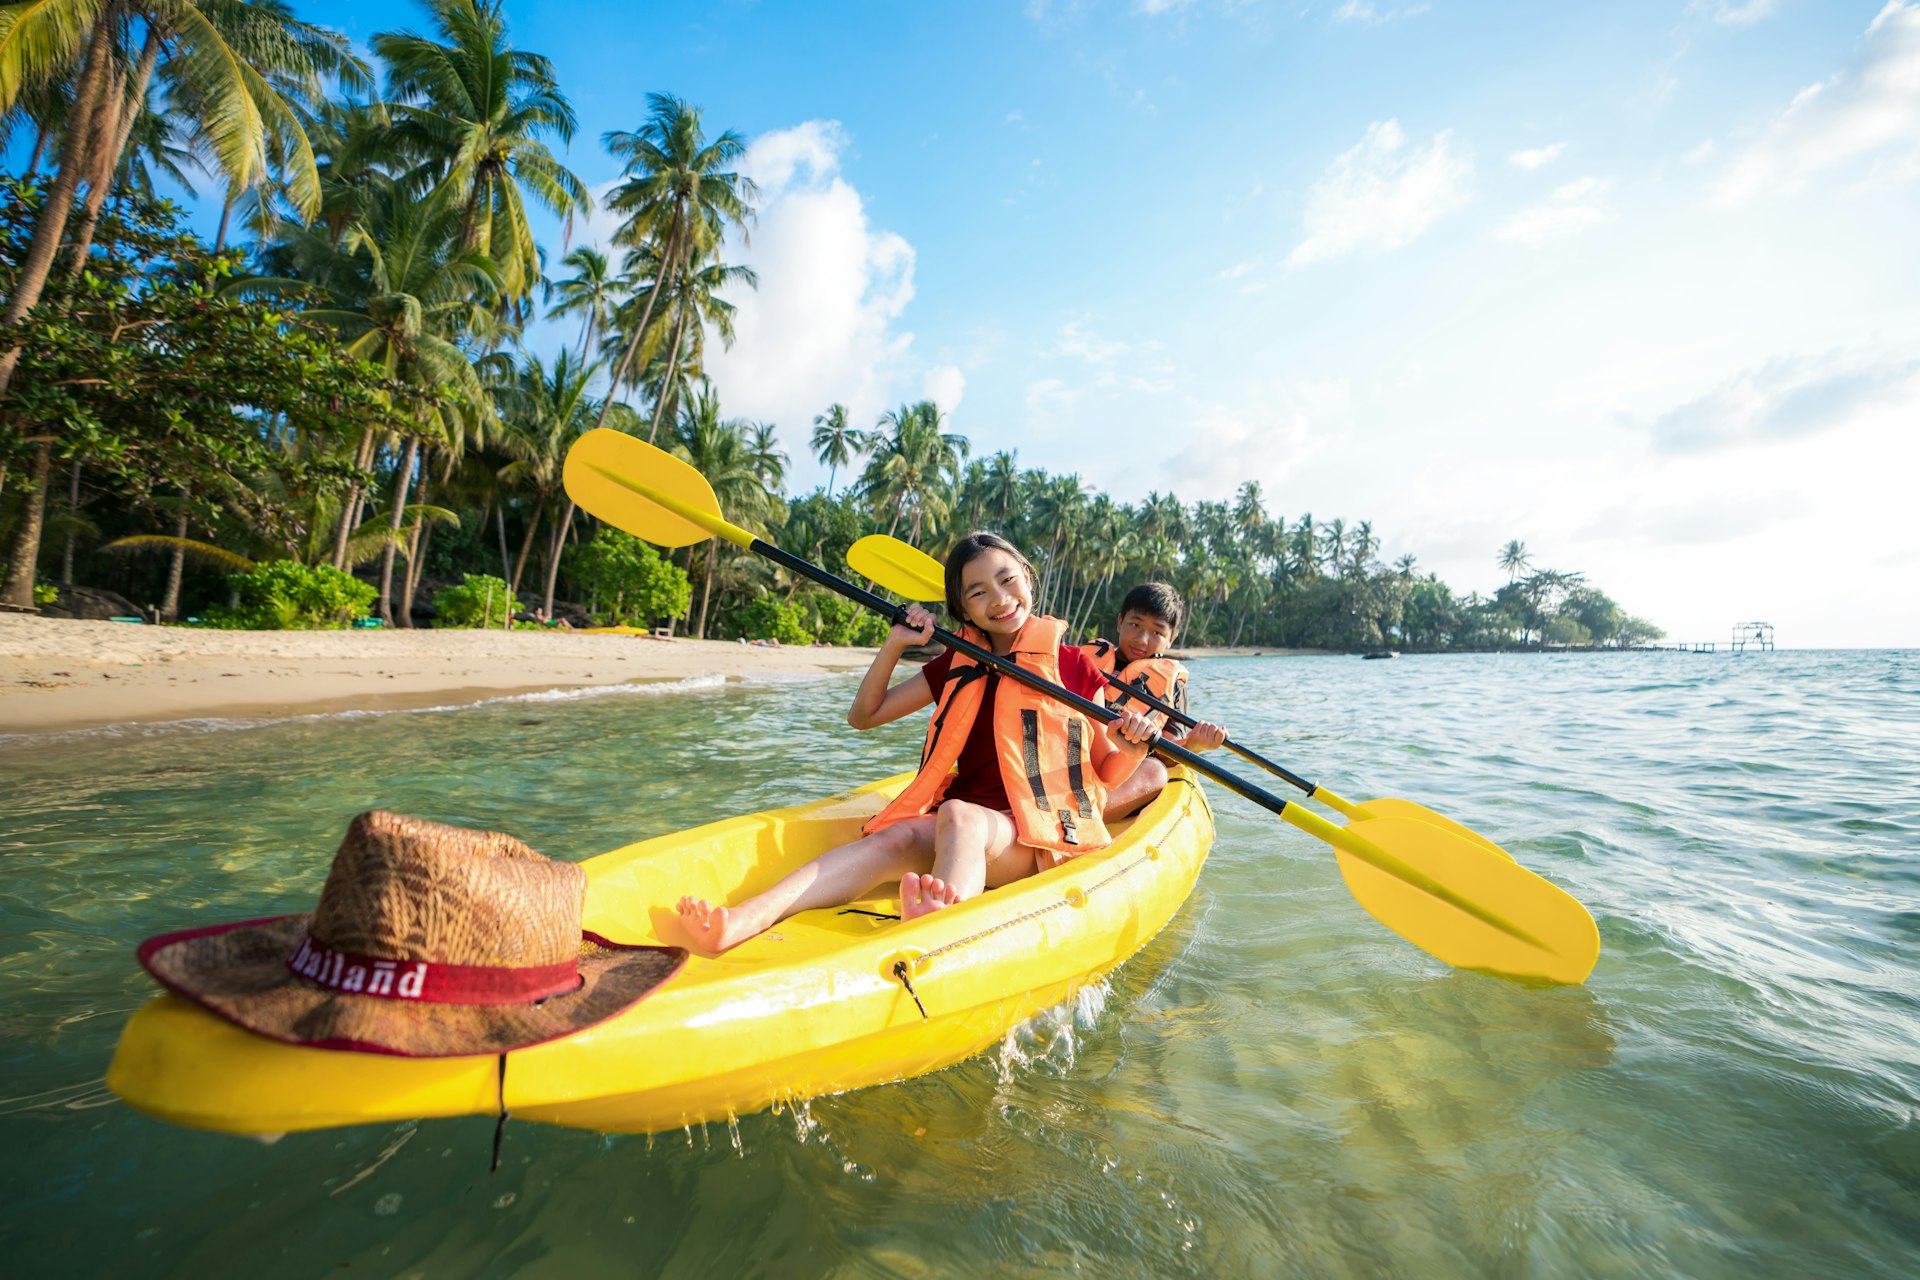 Two pre-teen children in a yellow kayak along a tropical palm-tree lined coastline